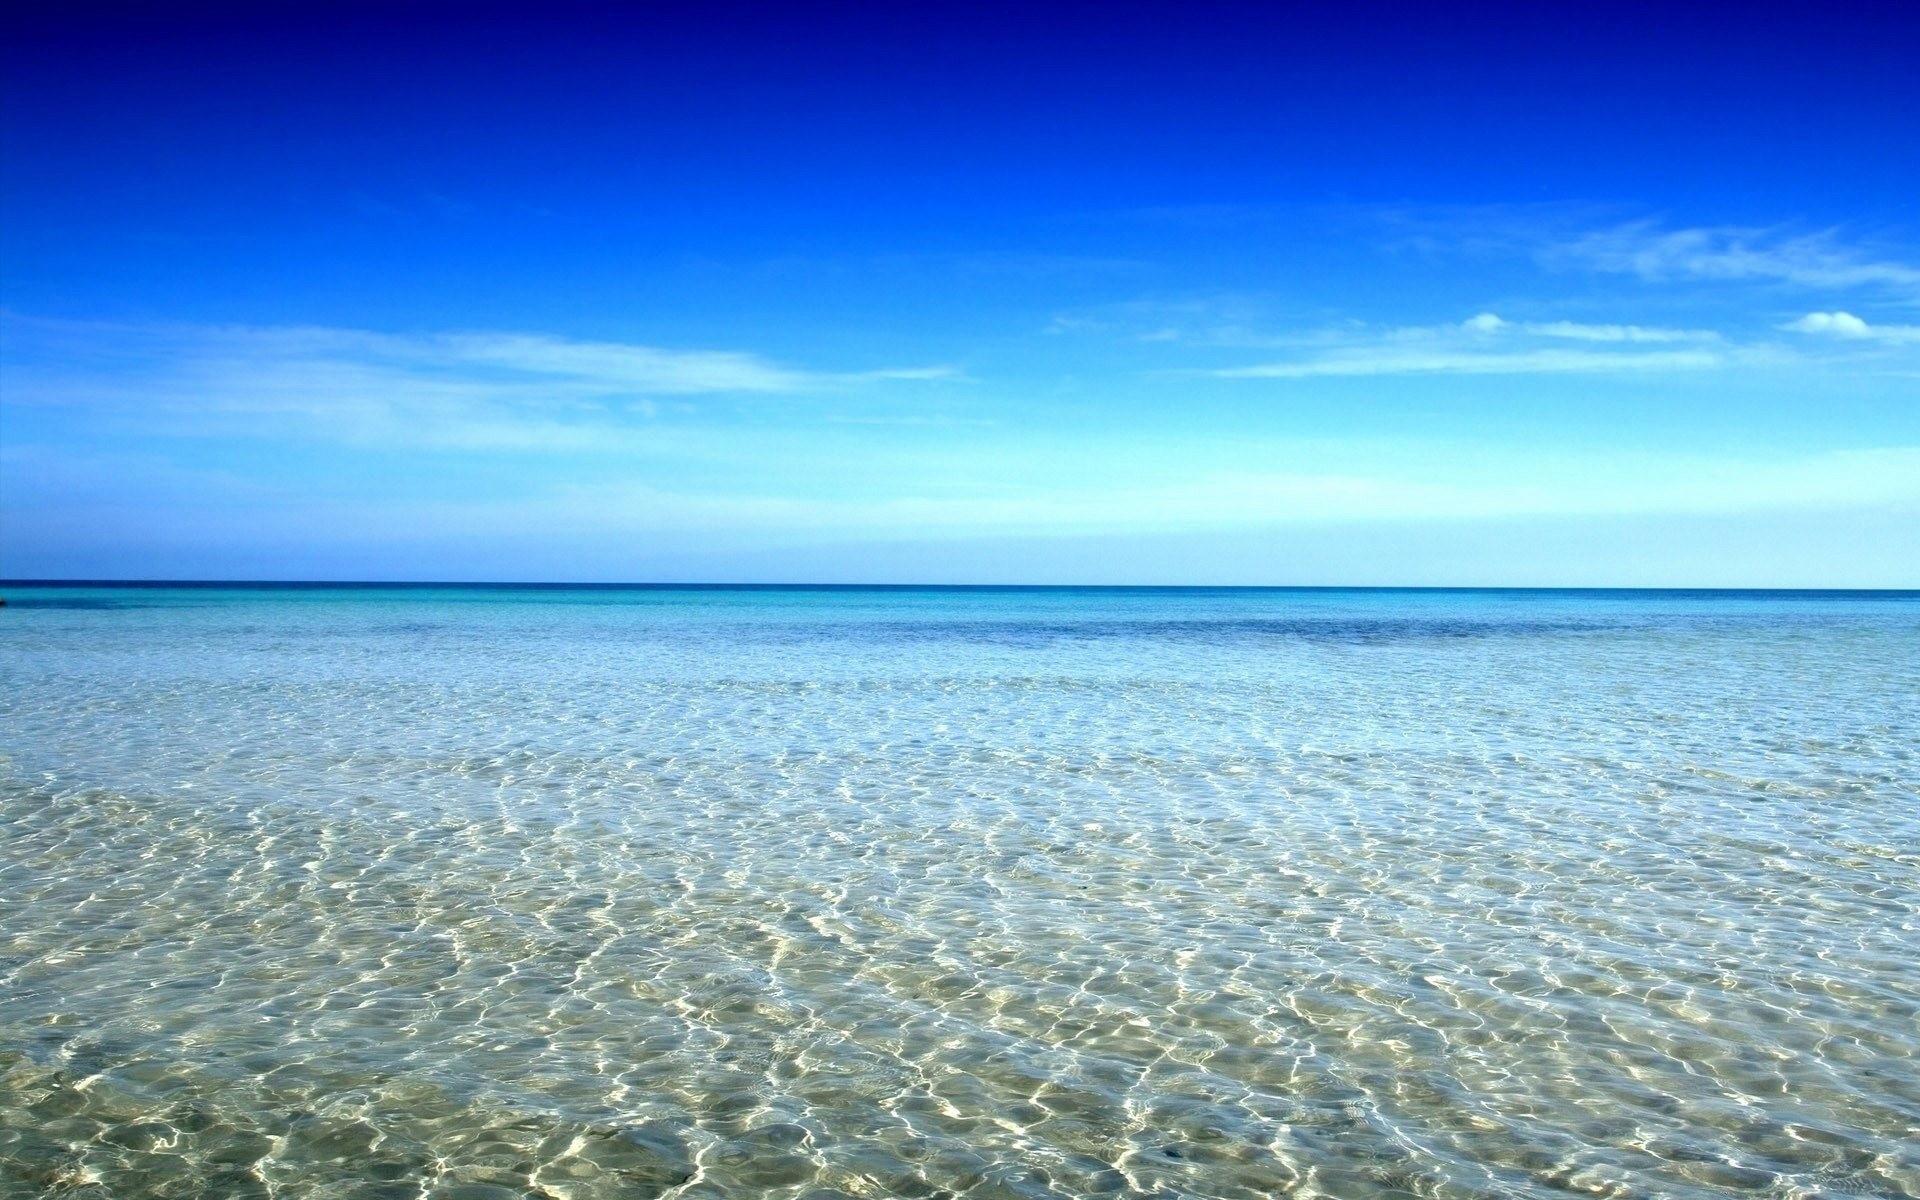 Shallow water near the shore